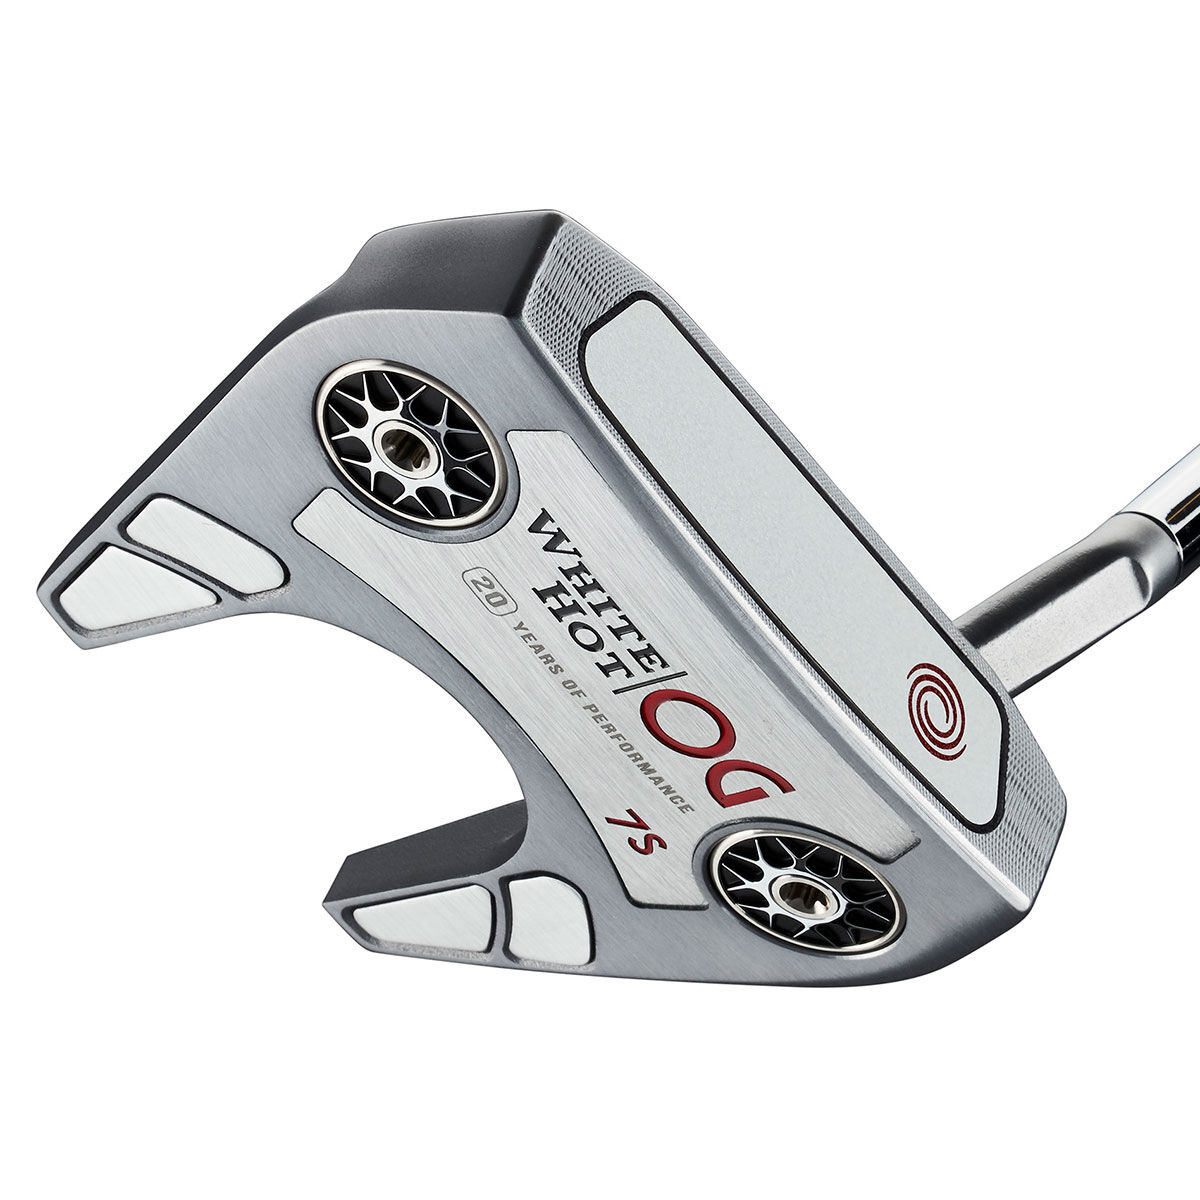 Odyssey White Hot OG 7S OS Golf Putter, Mens, Right hand, 35 inches | American Golf von Odyssey